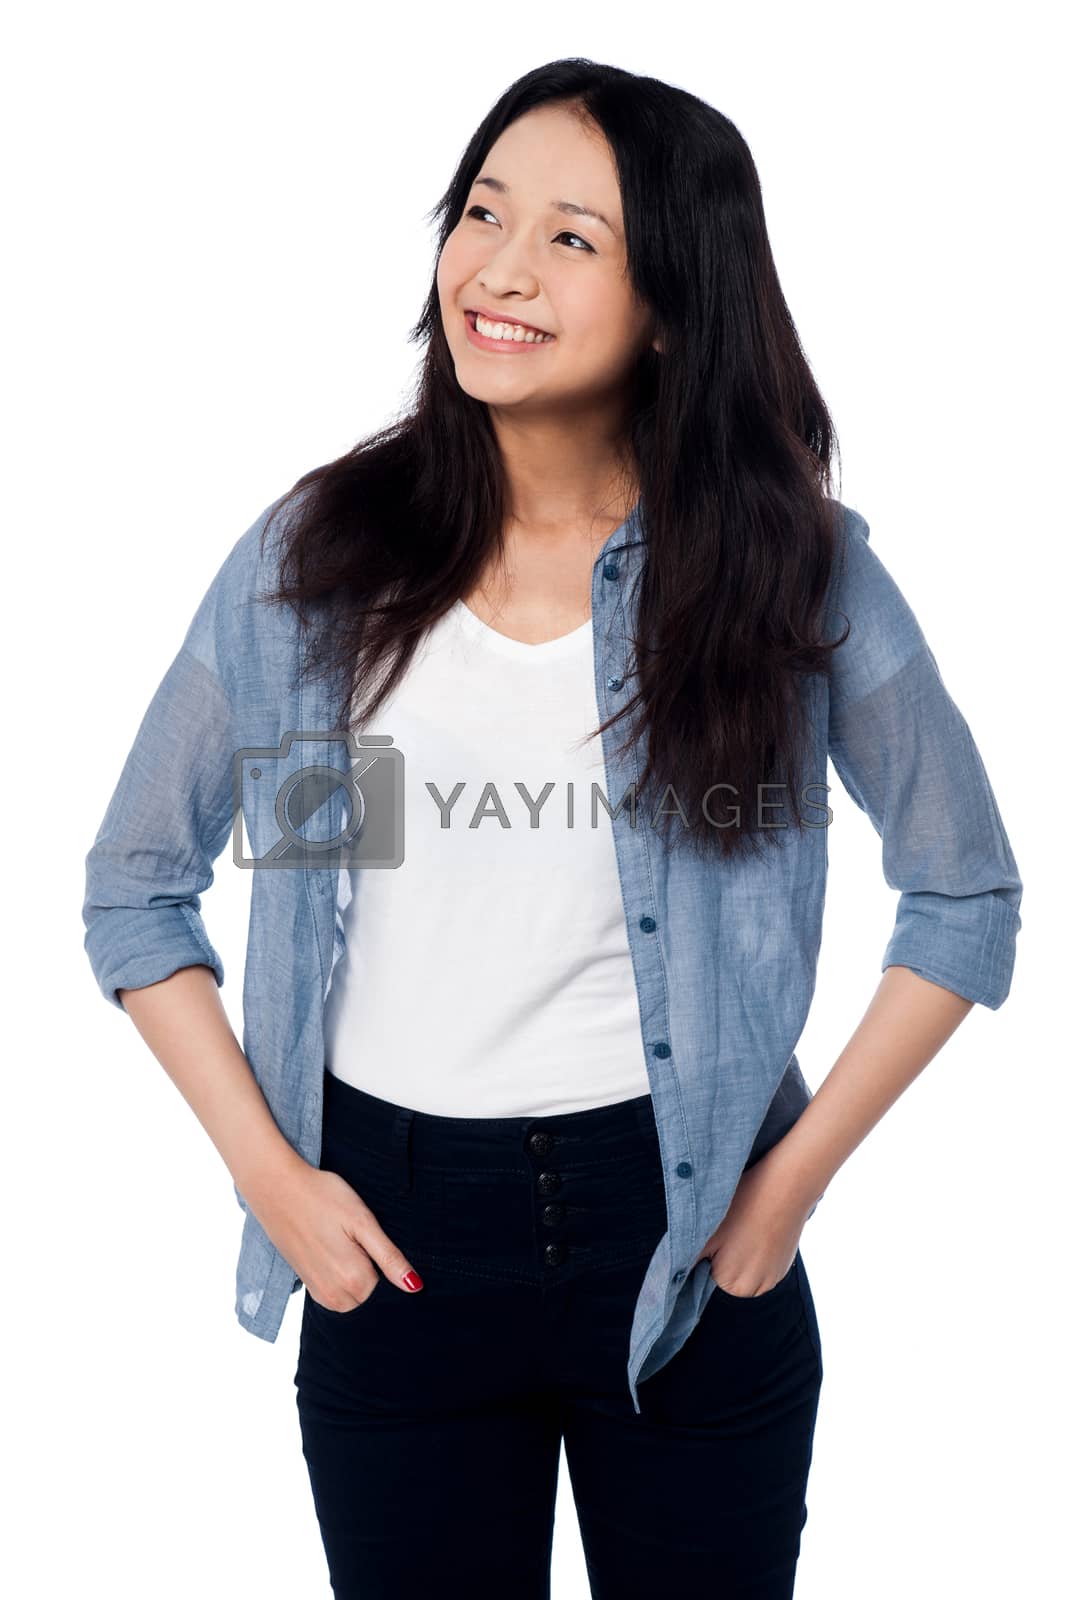 Royalty free image of Charming asian girl, casual portrait by stockyimages